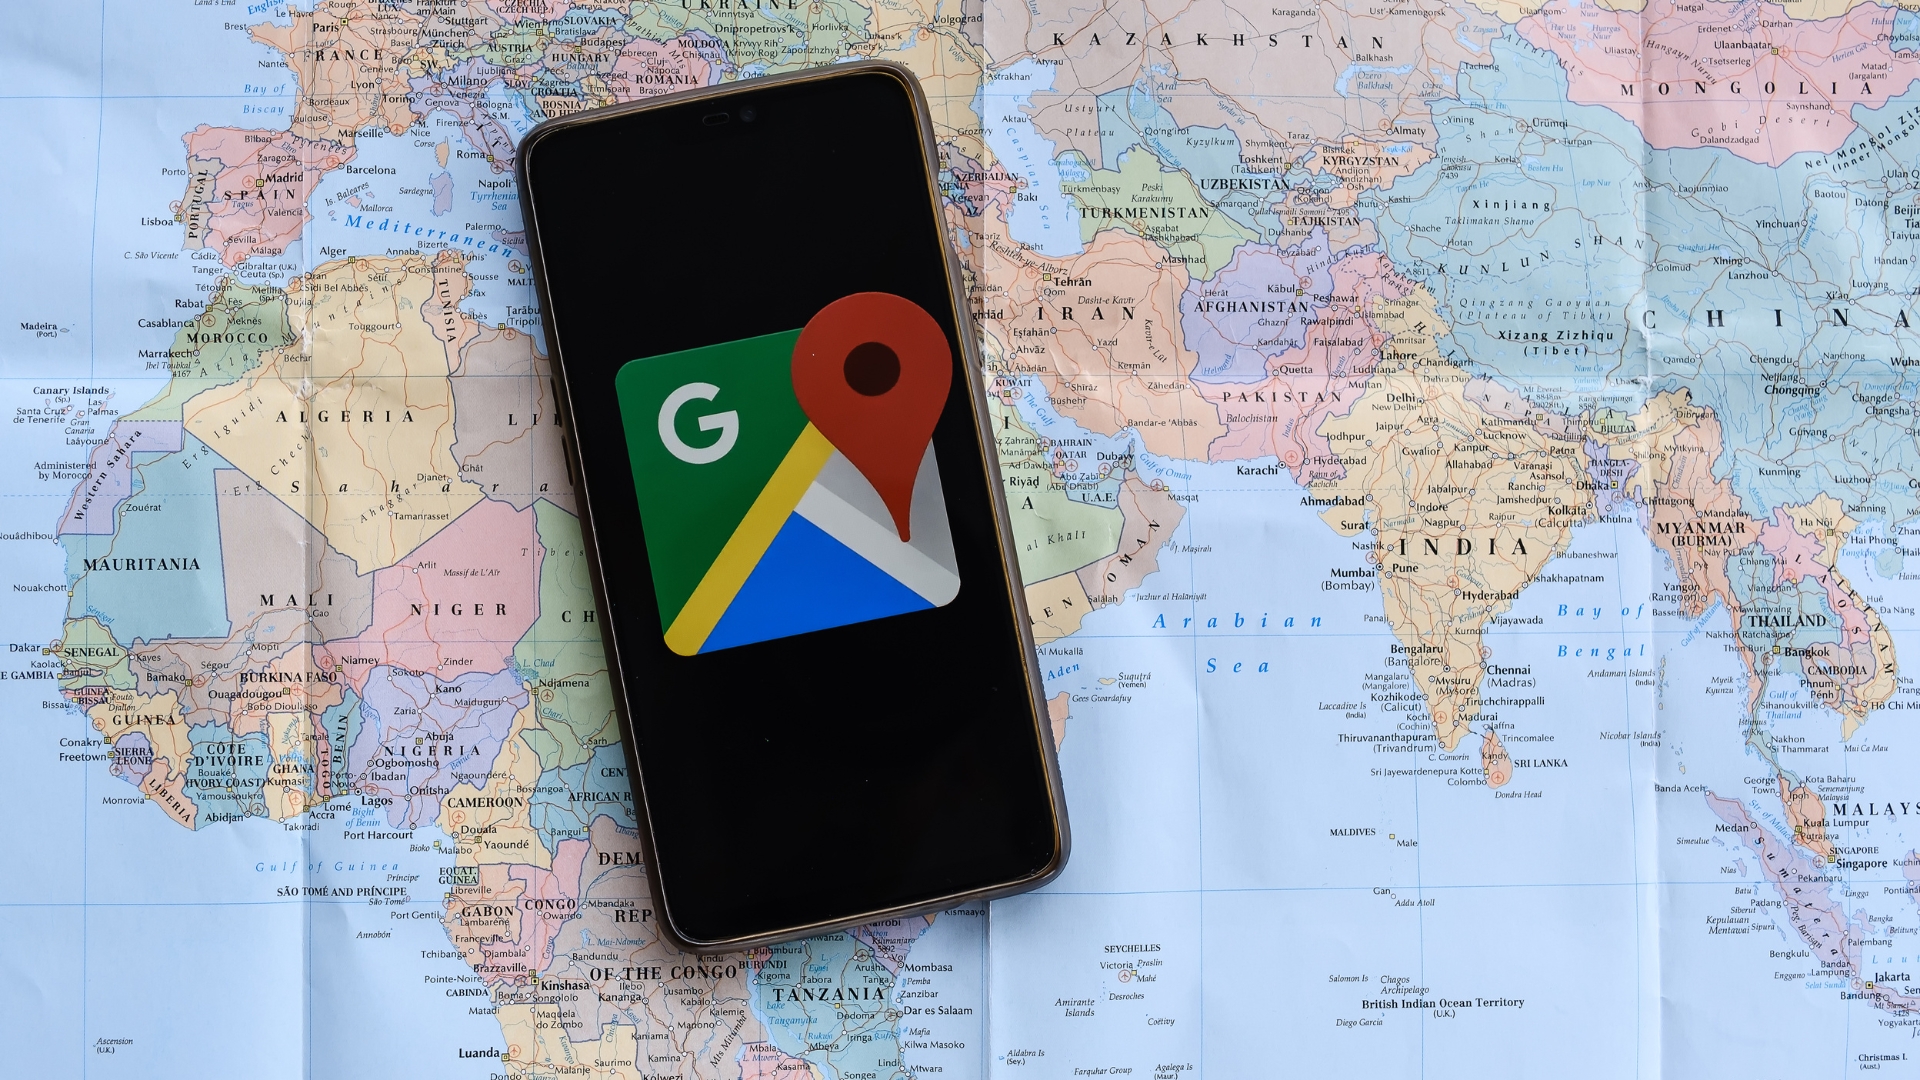 These 10 places cannot appear on Google Maps